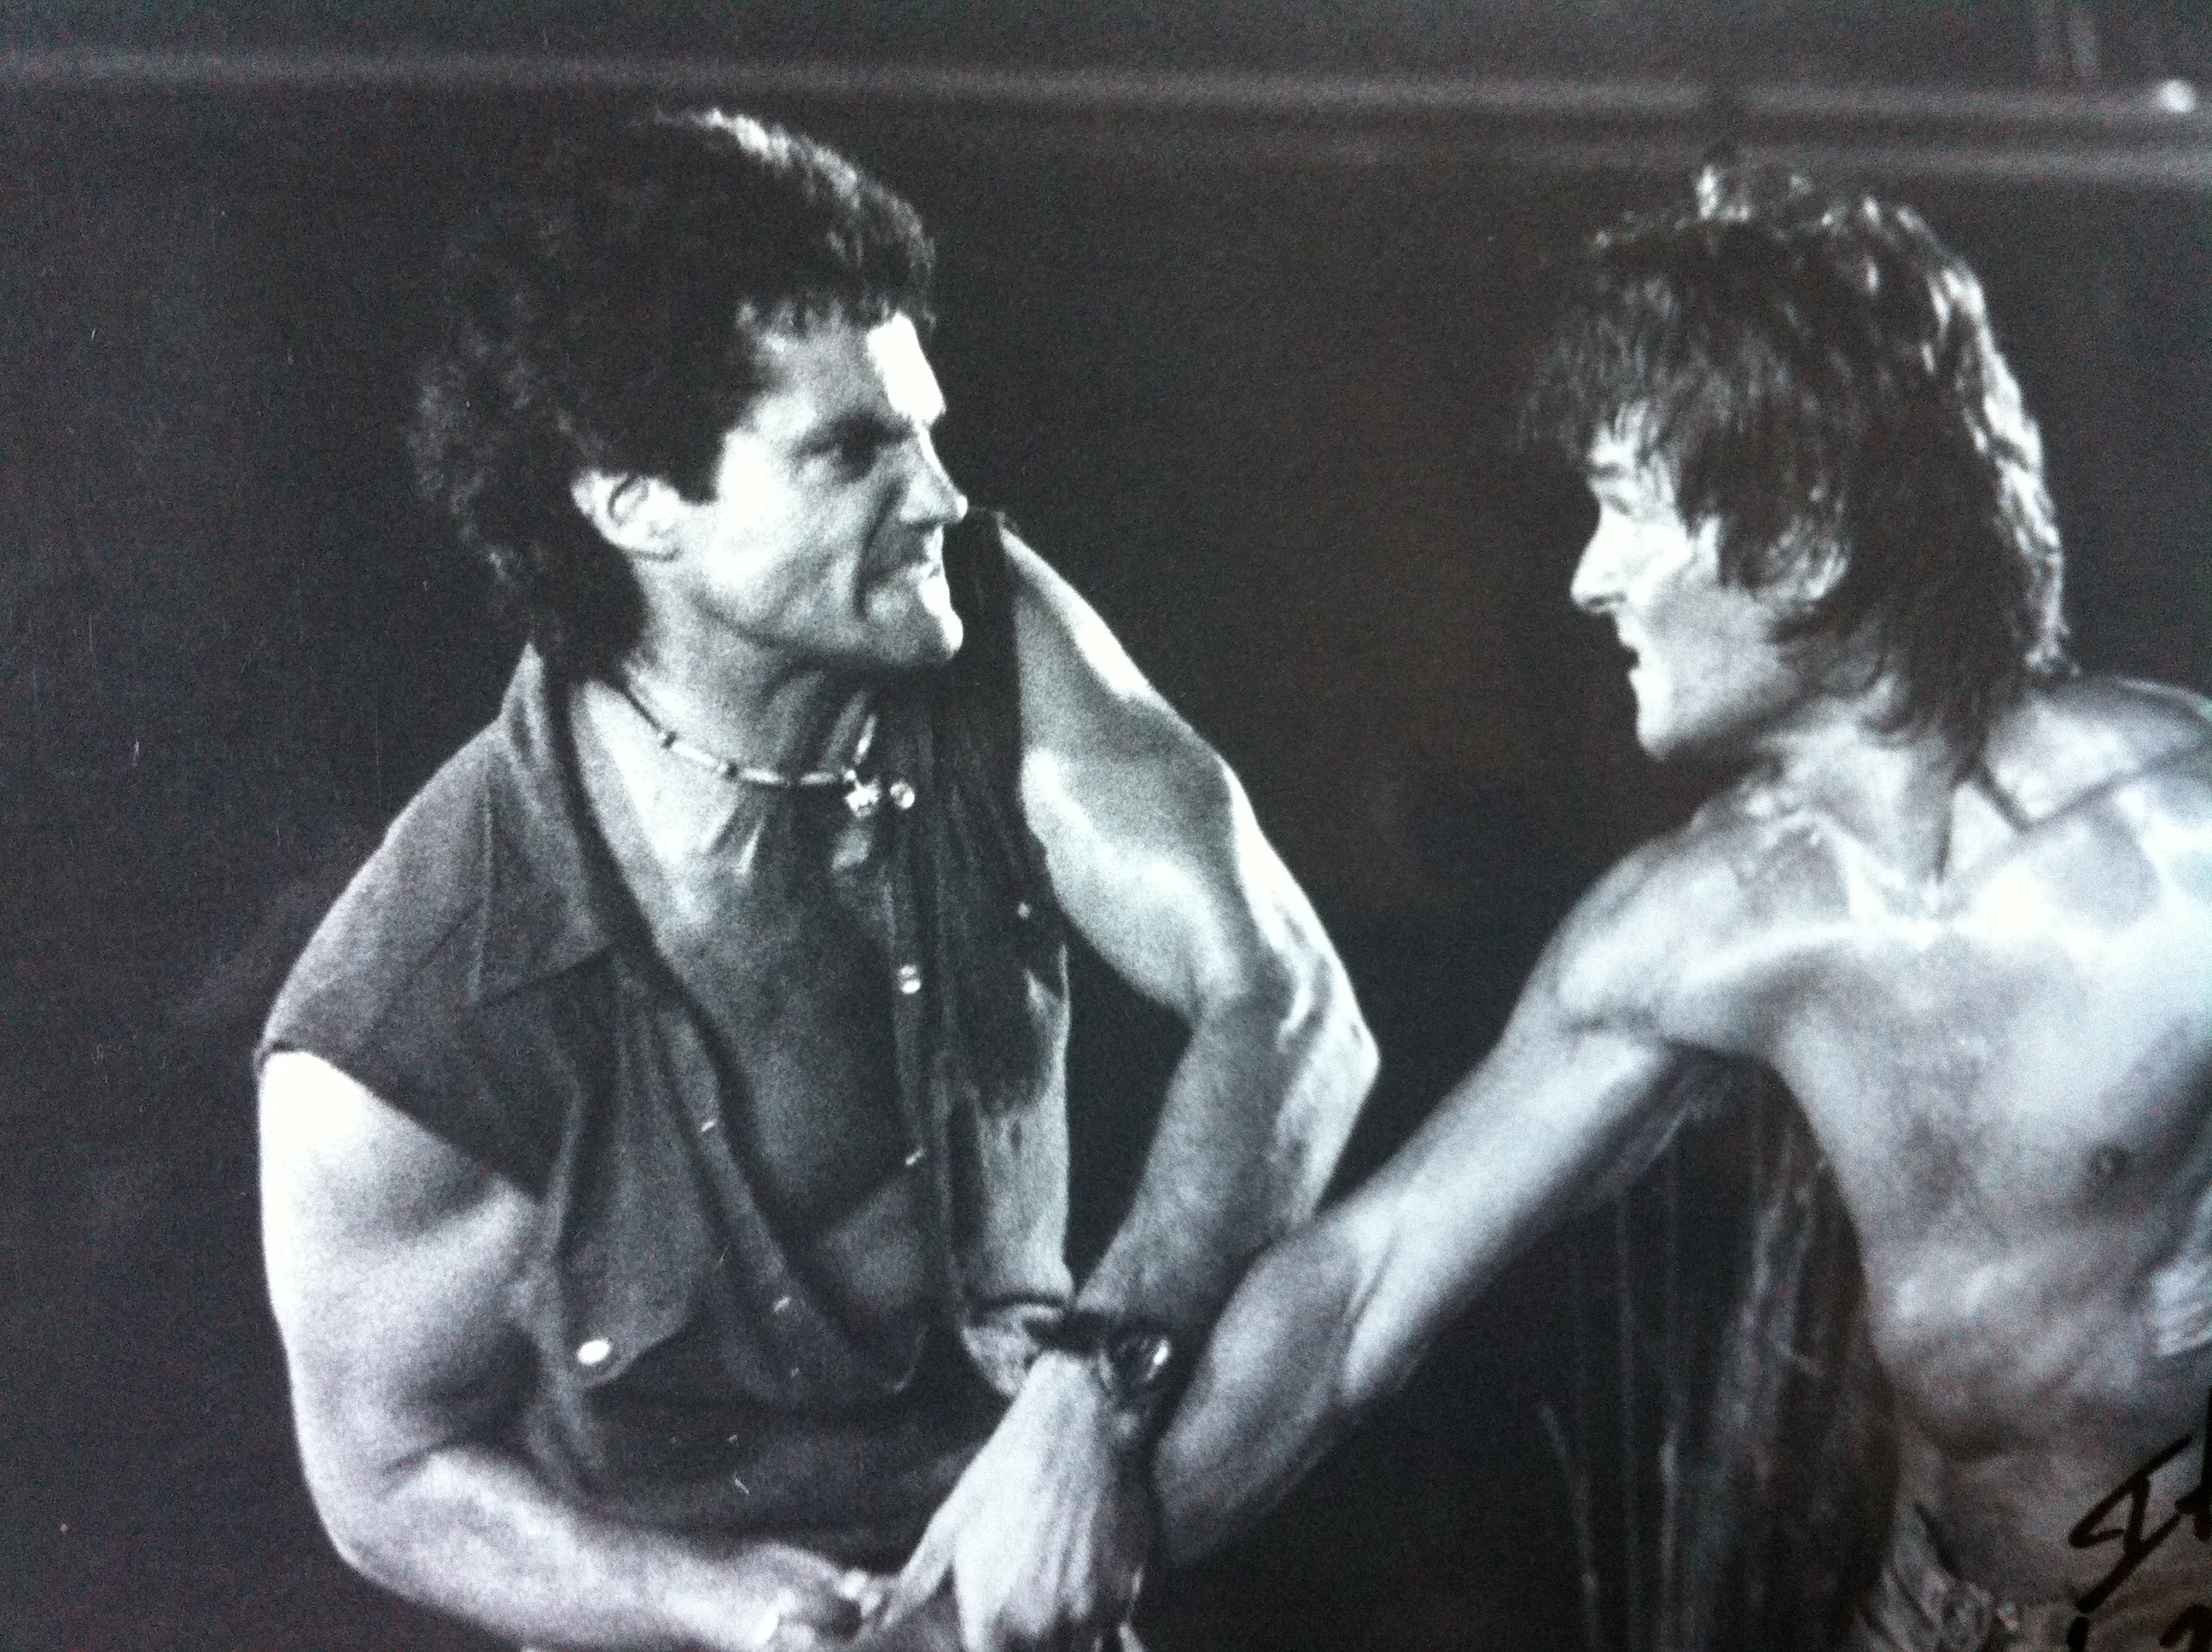 Road House as Jimmy Reno with Patrick Swayze